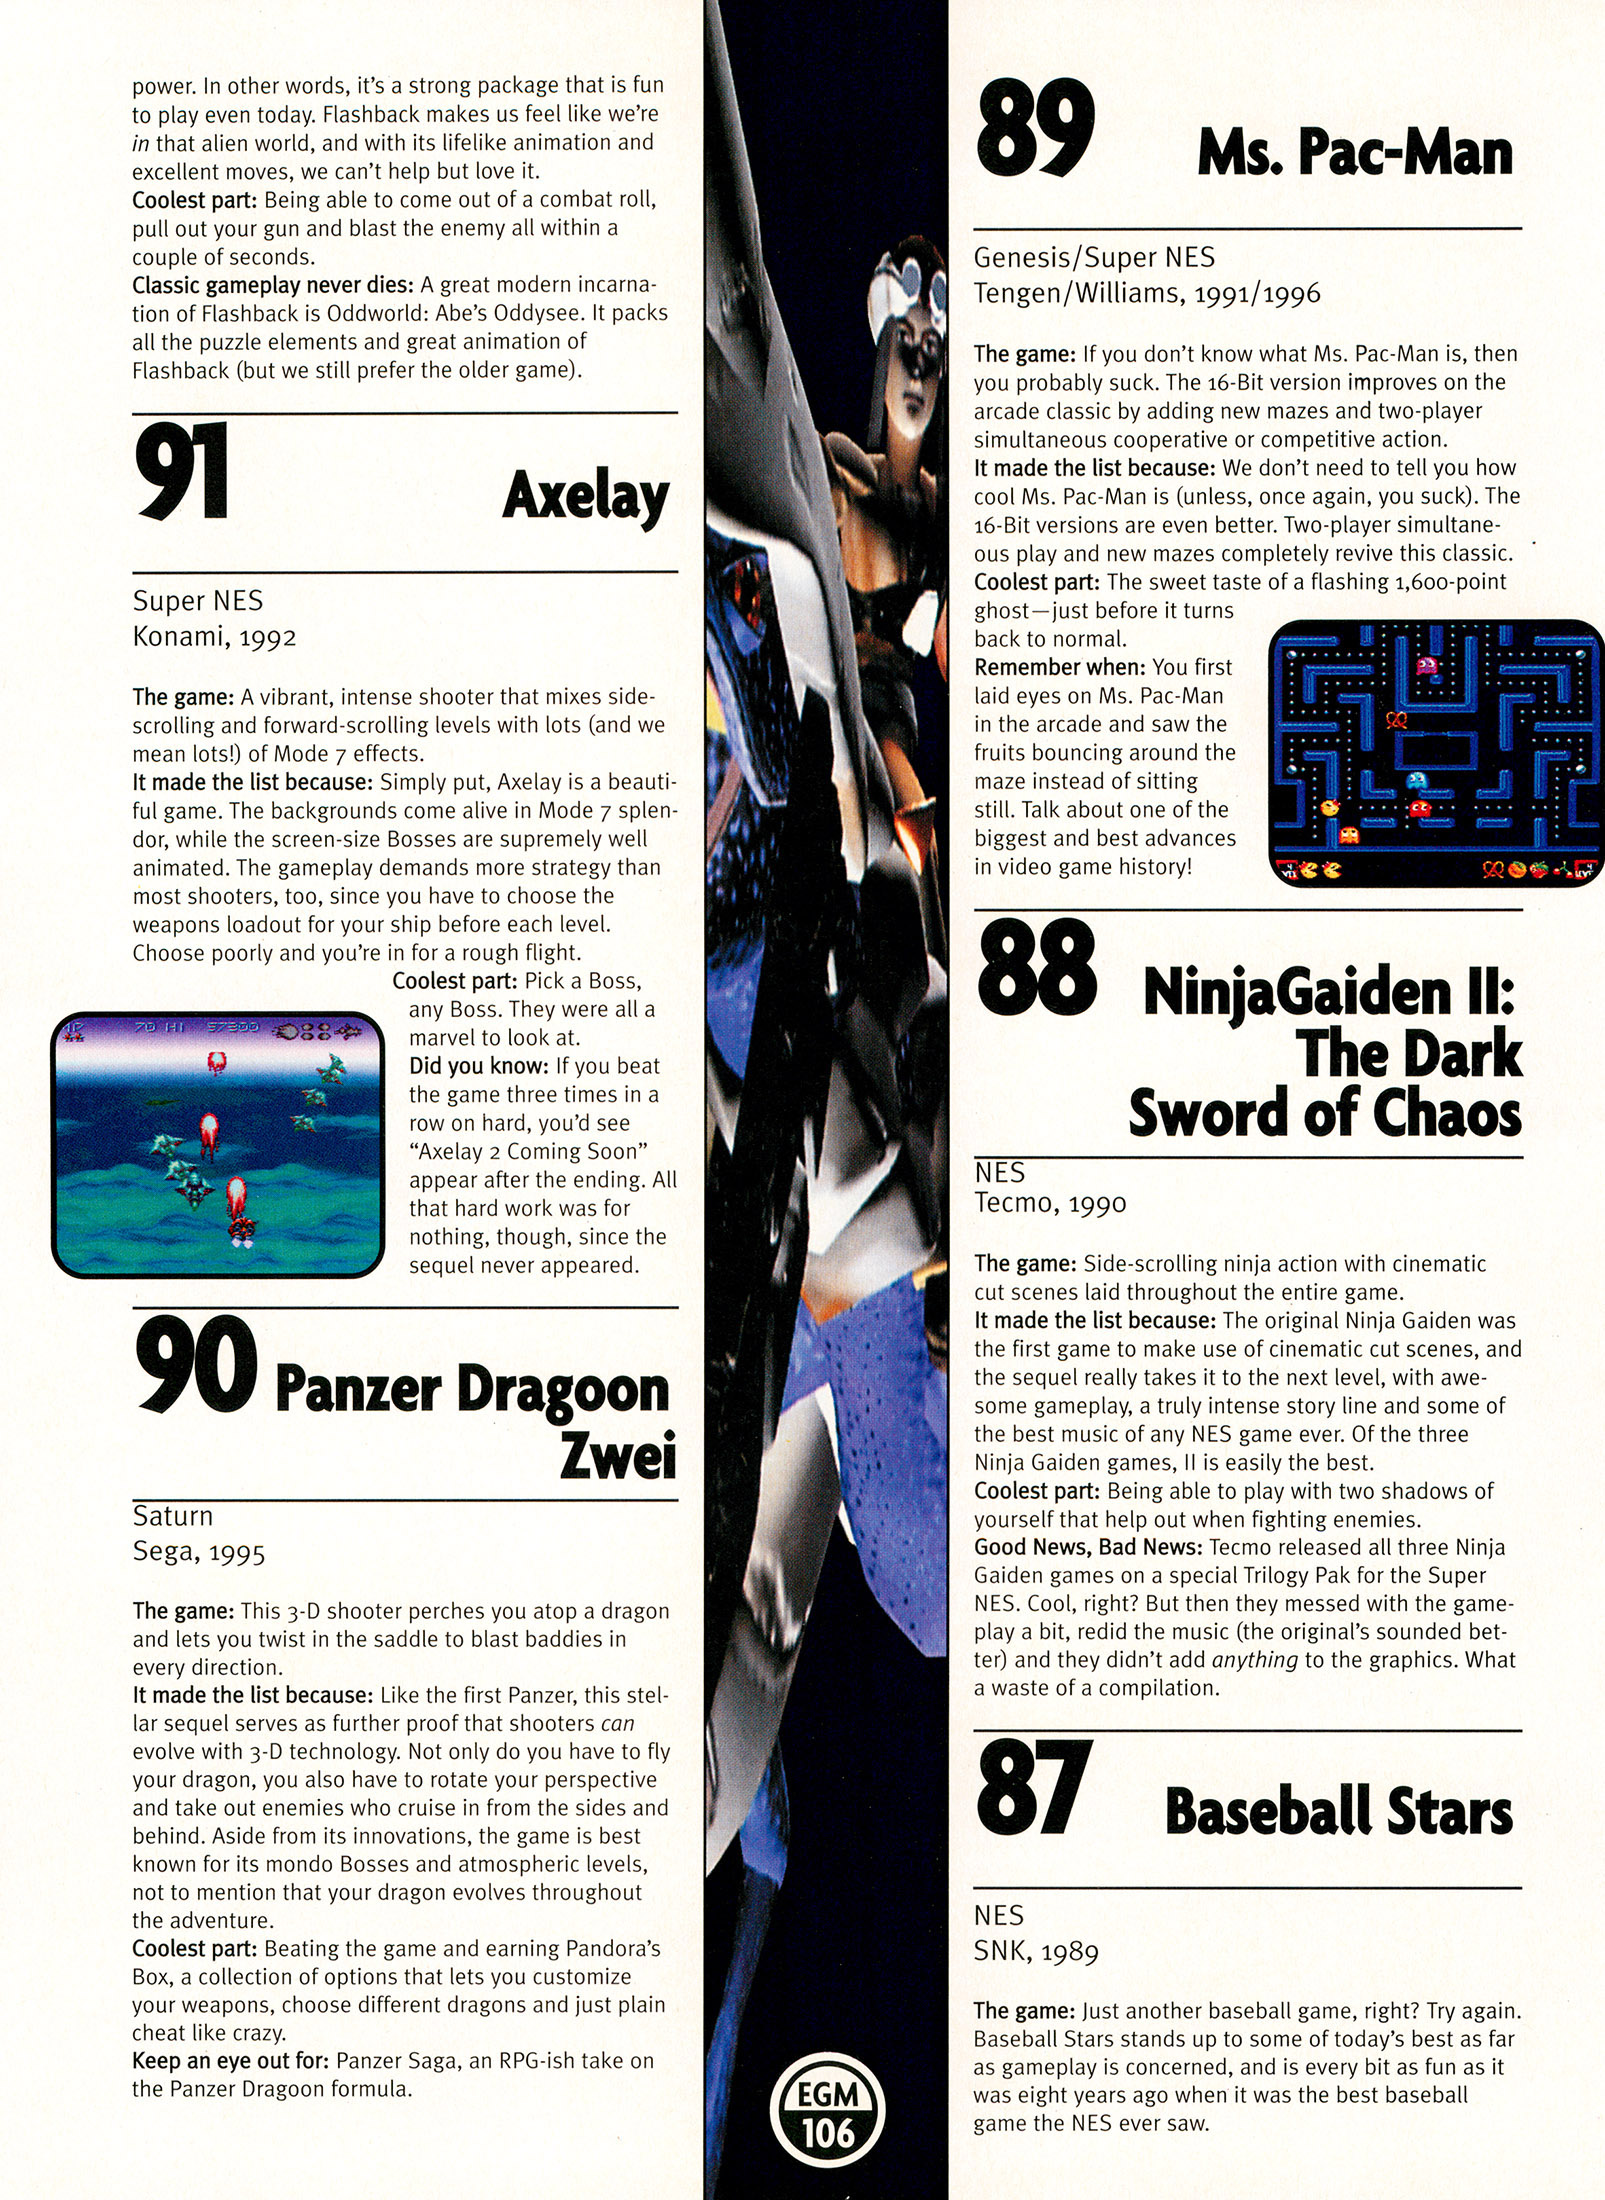 100 Best Games of All Time, Electronic Gaming Monthly November 1997 page 106